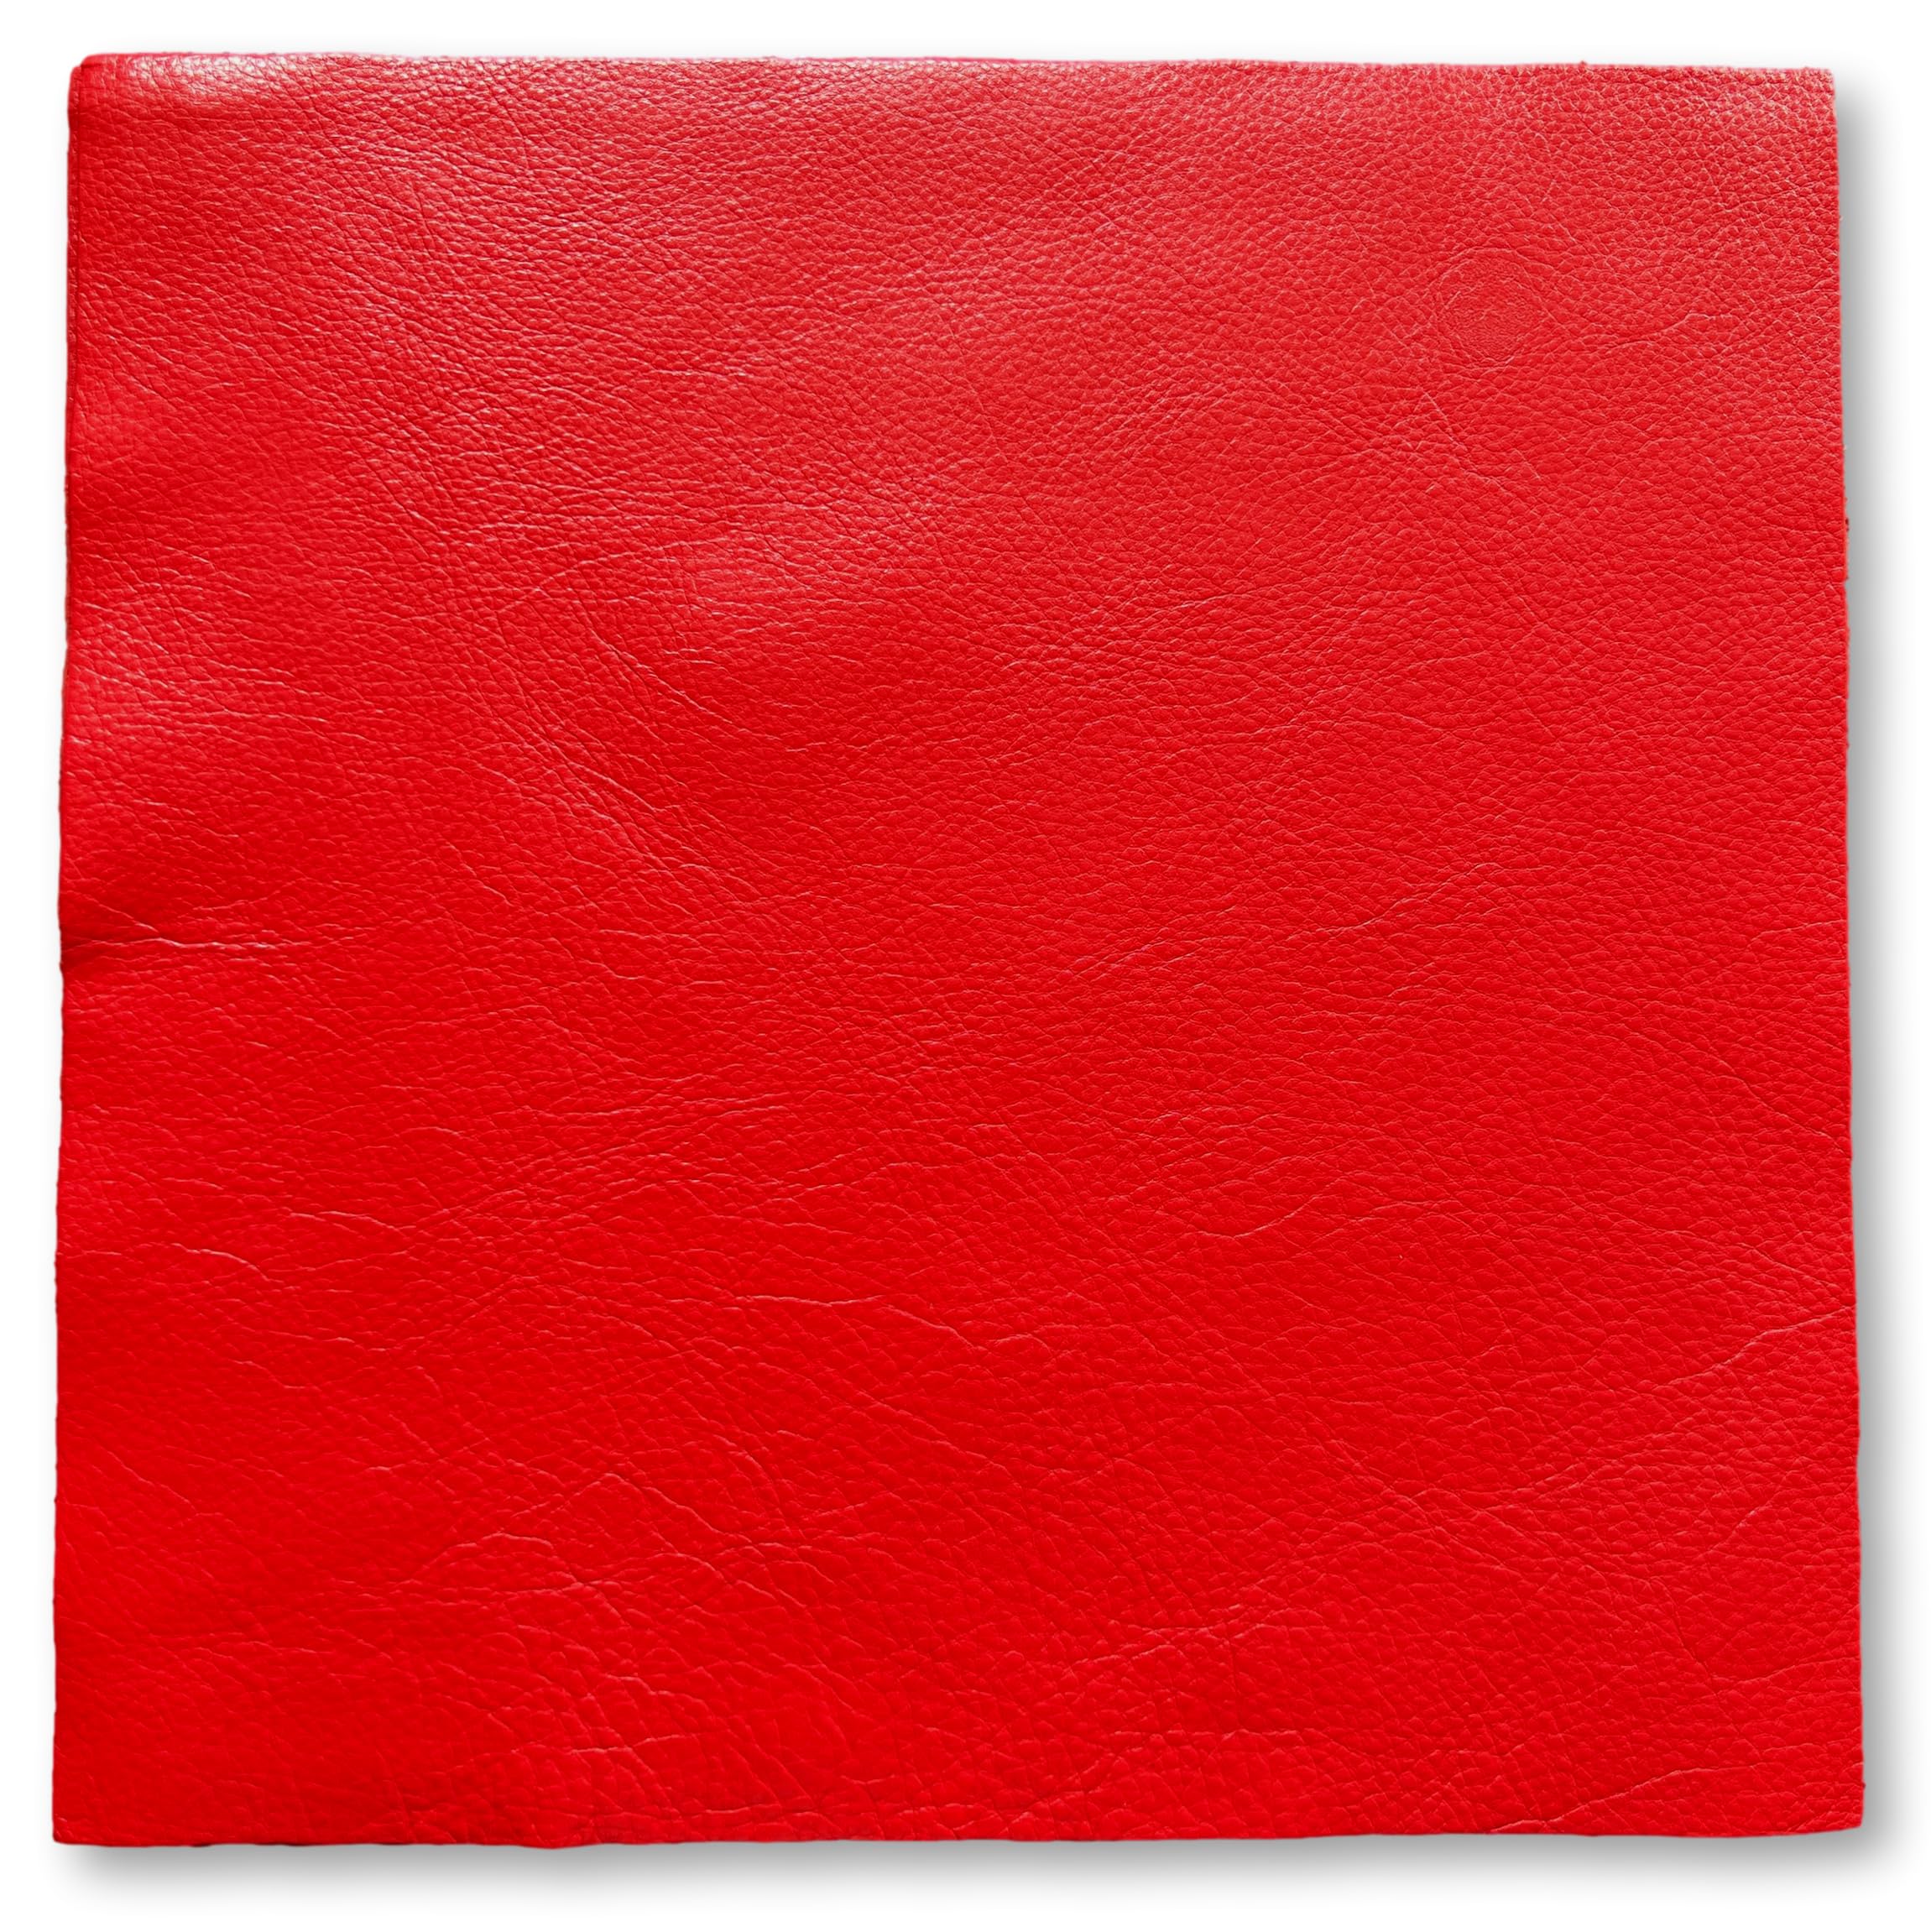 Natural Grain Cow Leathers: 12'' x 12'' Pre-Cut Leather Pieces (Red, 3 Pieces)